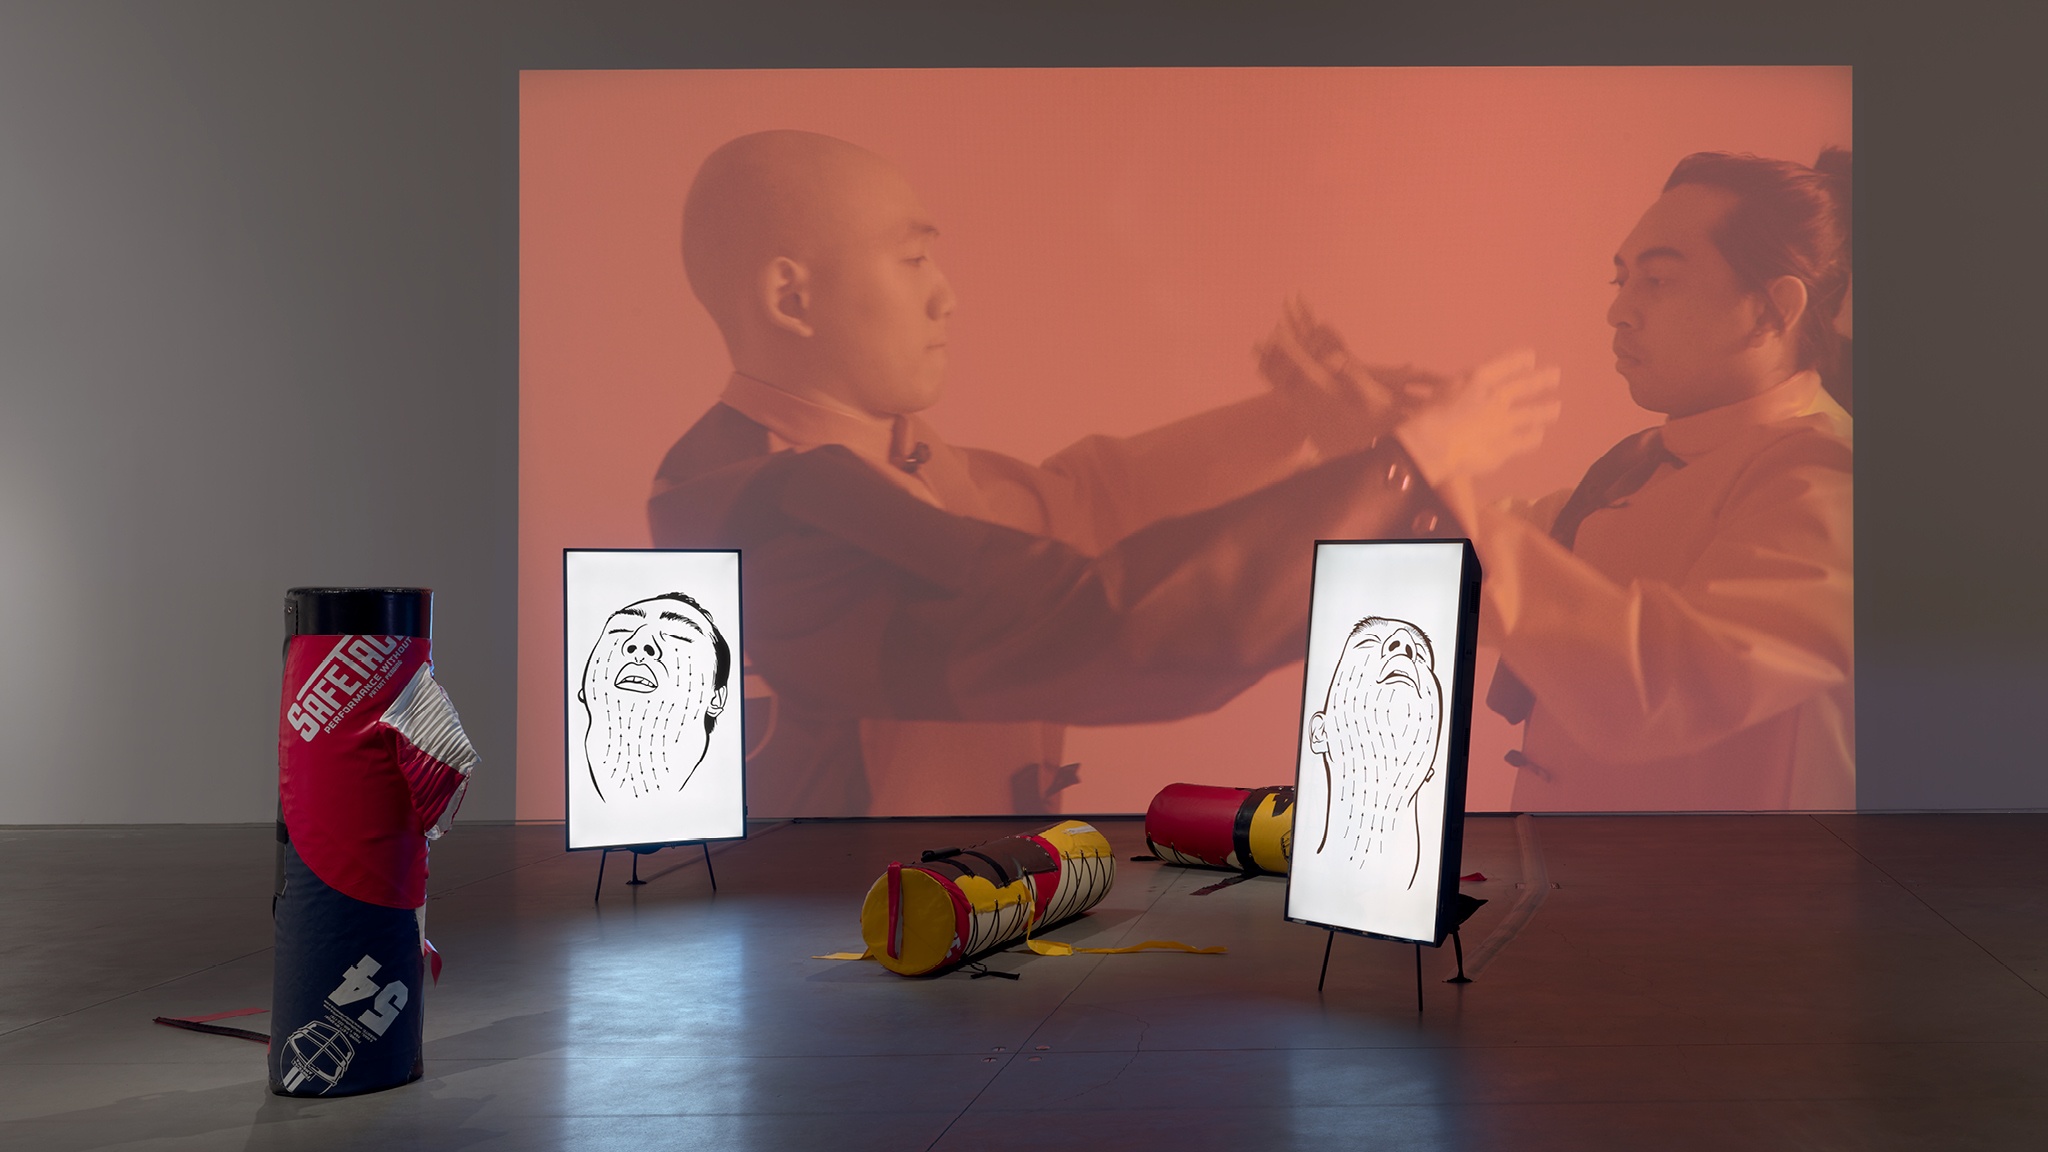 A video projection of two men with their arms outstretched toward each other on a wall with deconstructed tackling dummies and two vertical video monitors on the floor in front of the projection. The video monitors both show drawings of men's faces turned upward. 